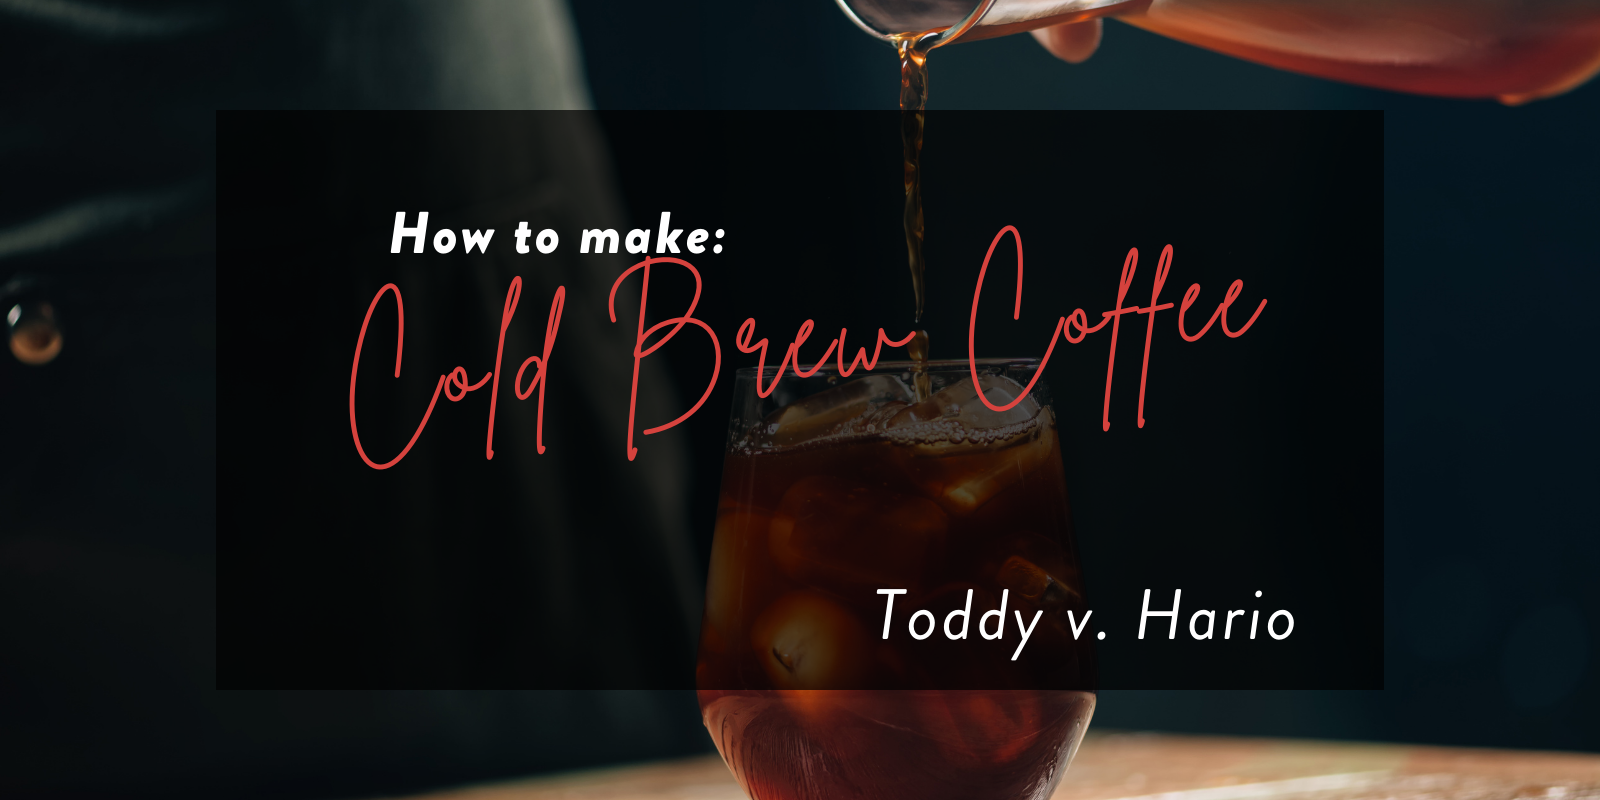 How to make Cold Brew at home.